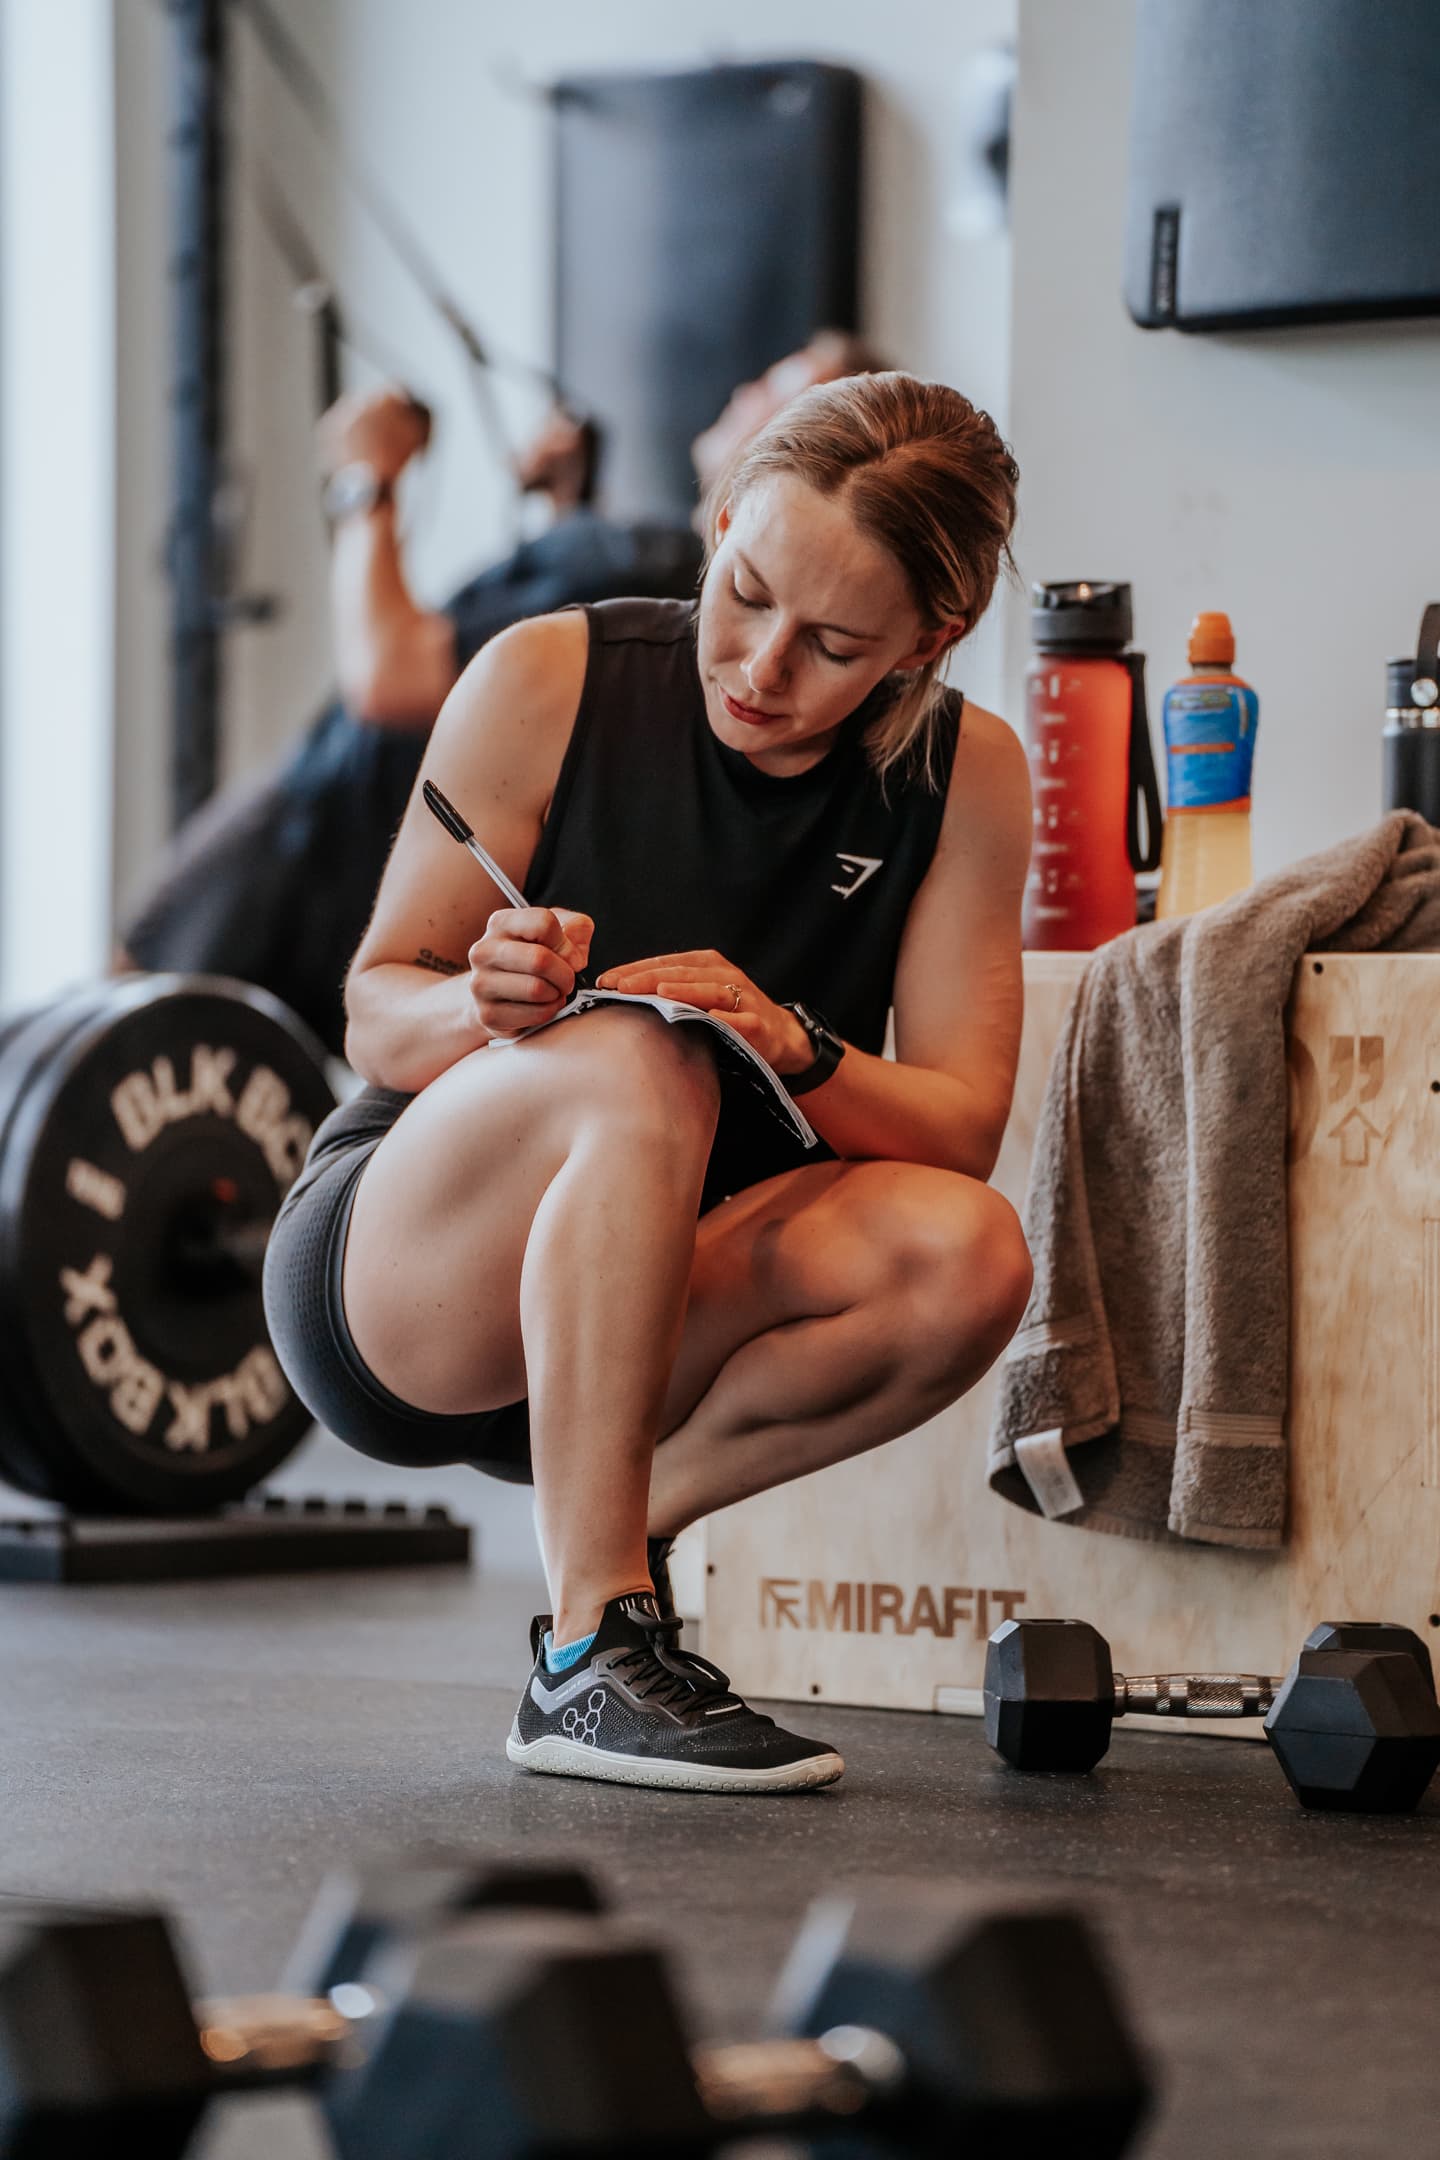 A person kneeling down writing in a notebook resting on her leg, with dumbbells in the foreground.